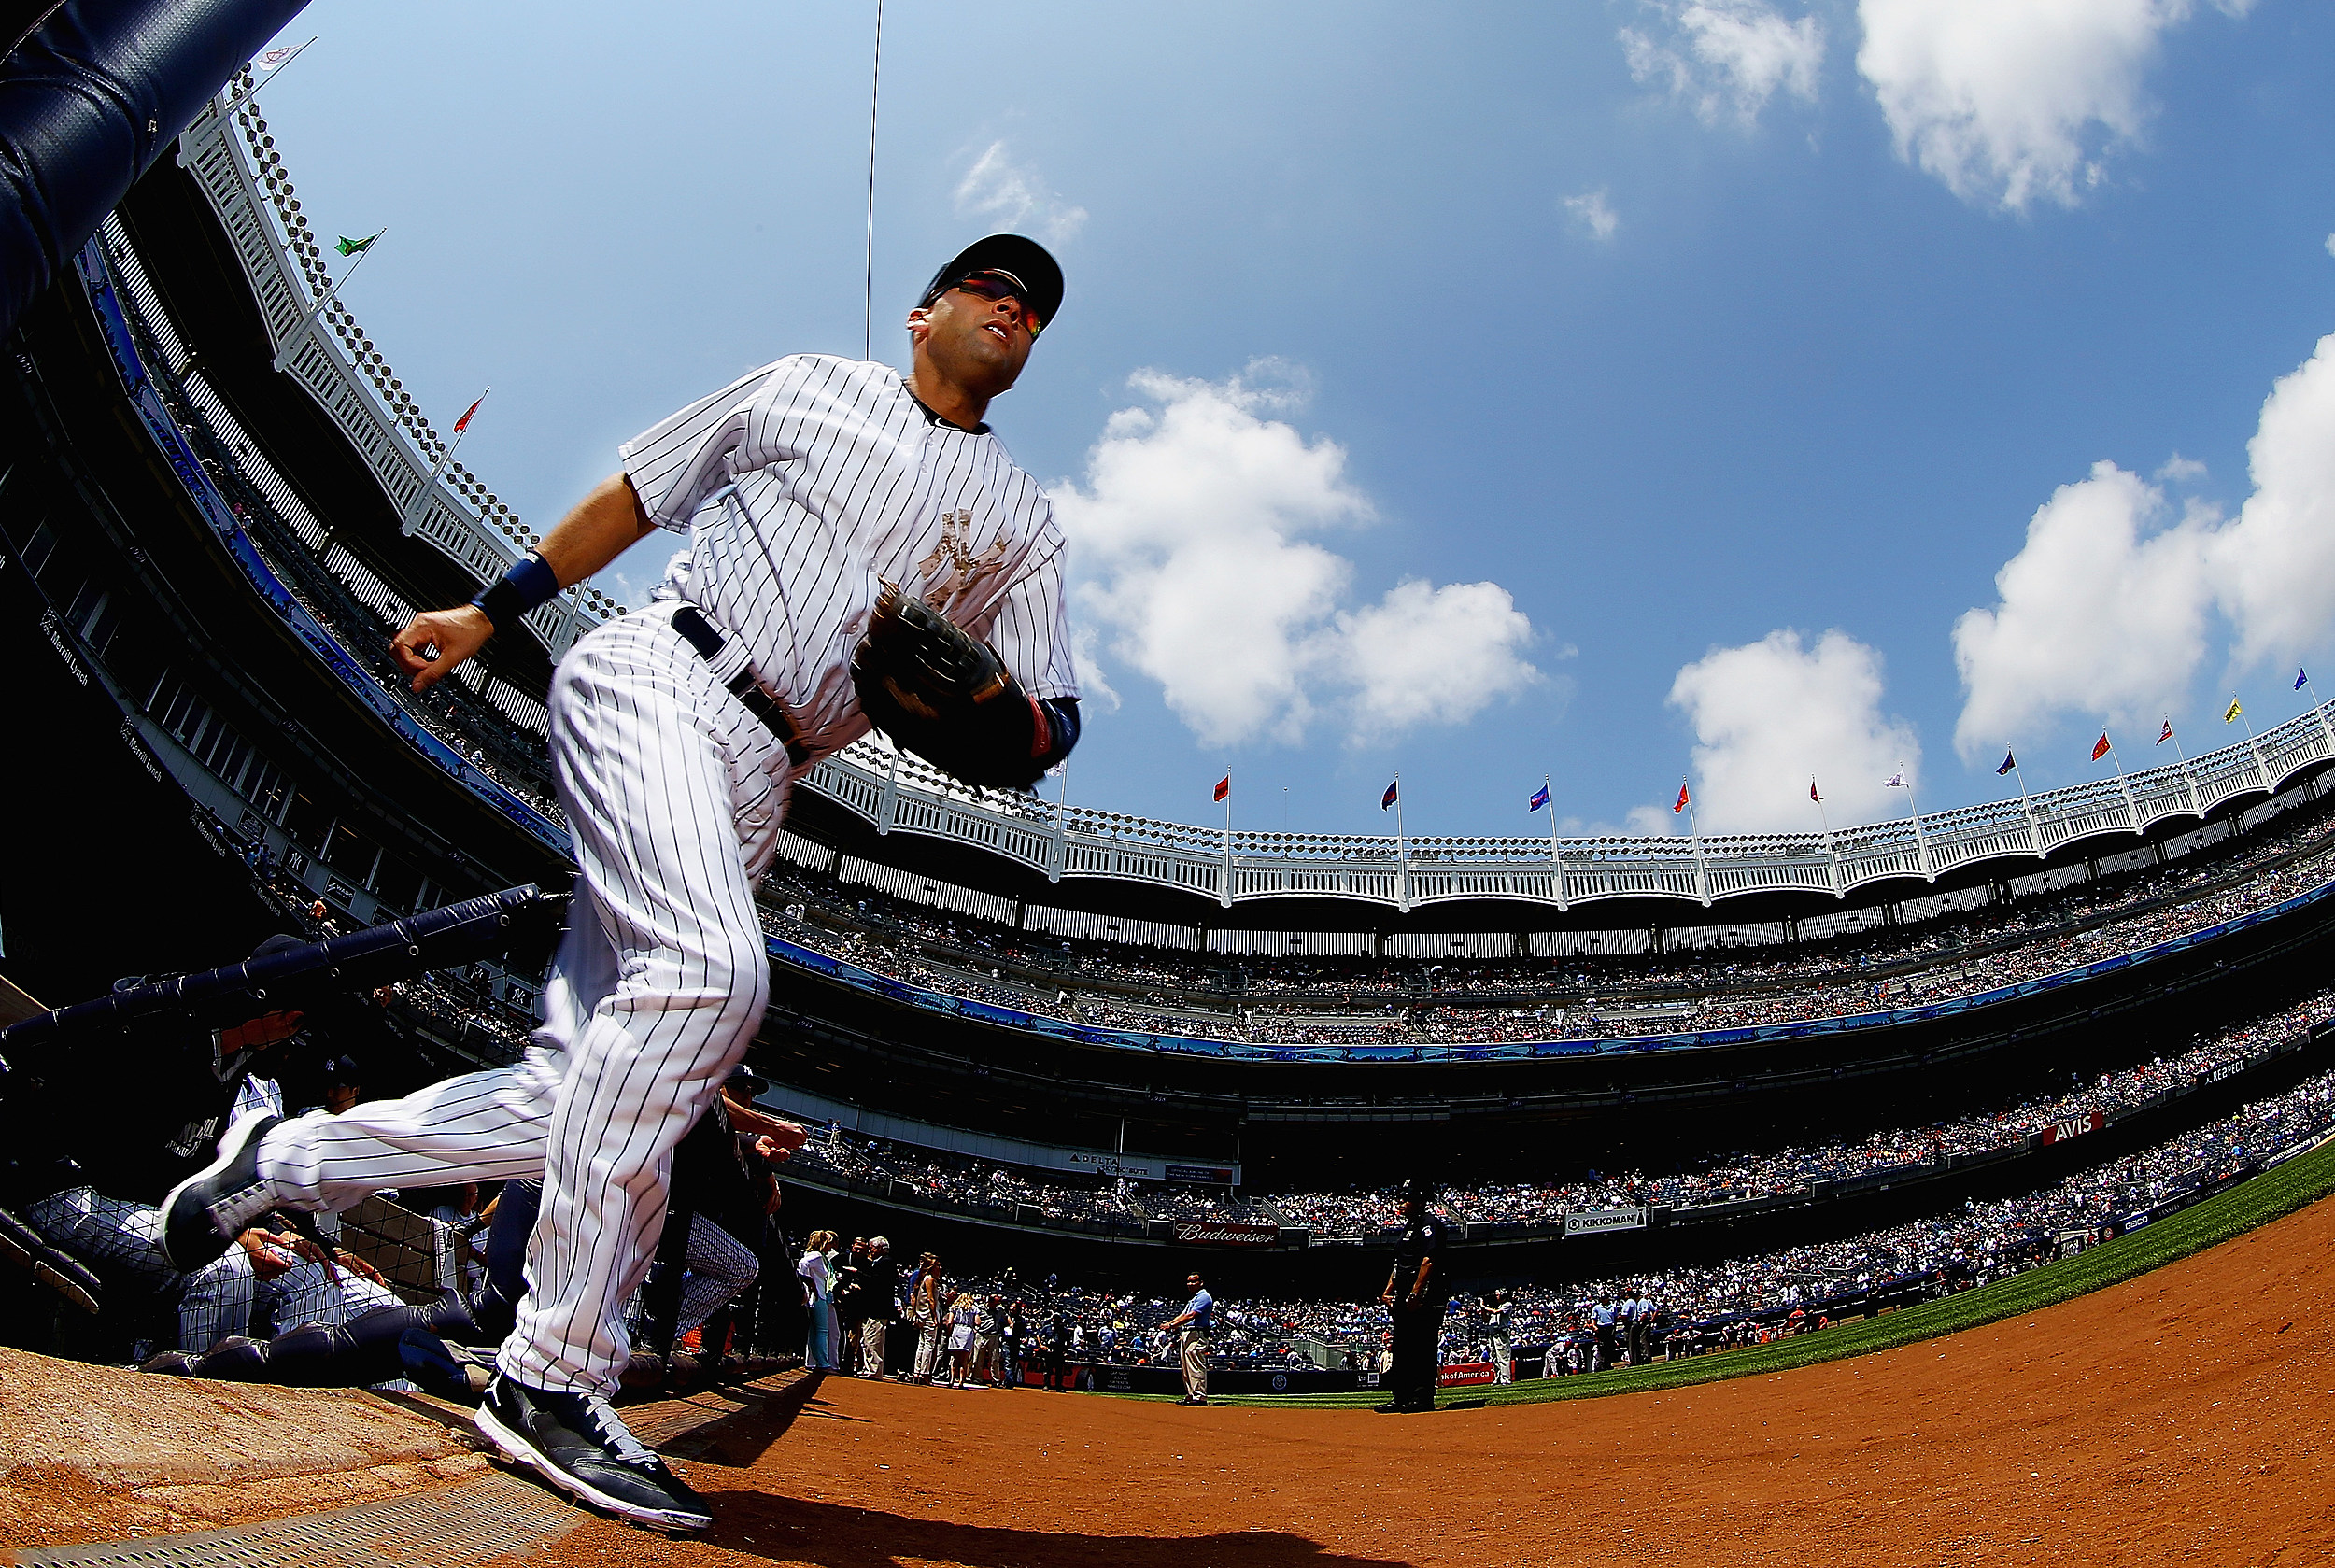 Yankees star Derek Jeter inducted into Baseball Hall of Fame - NBC